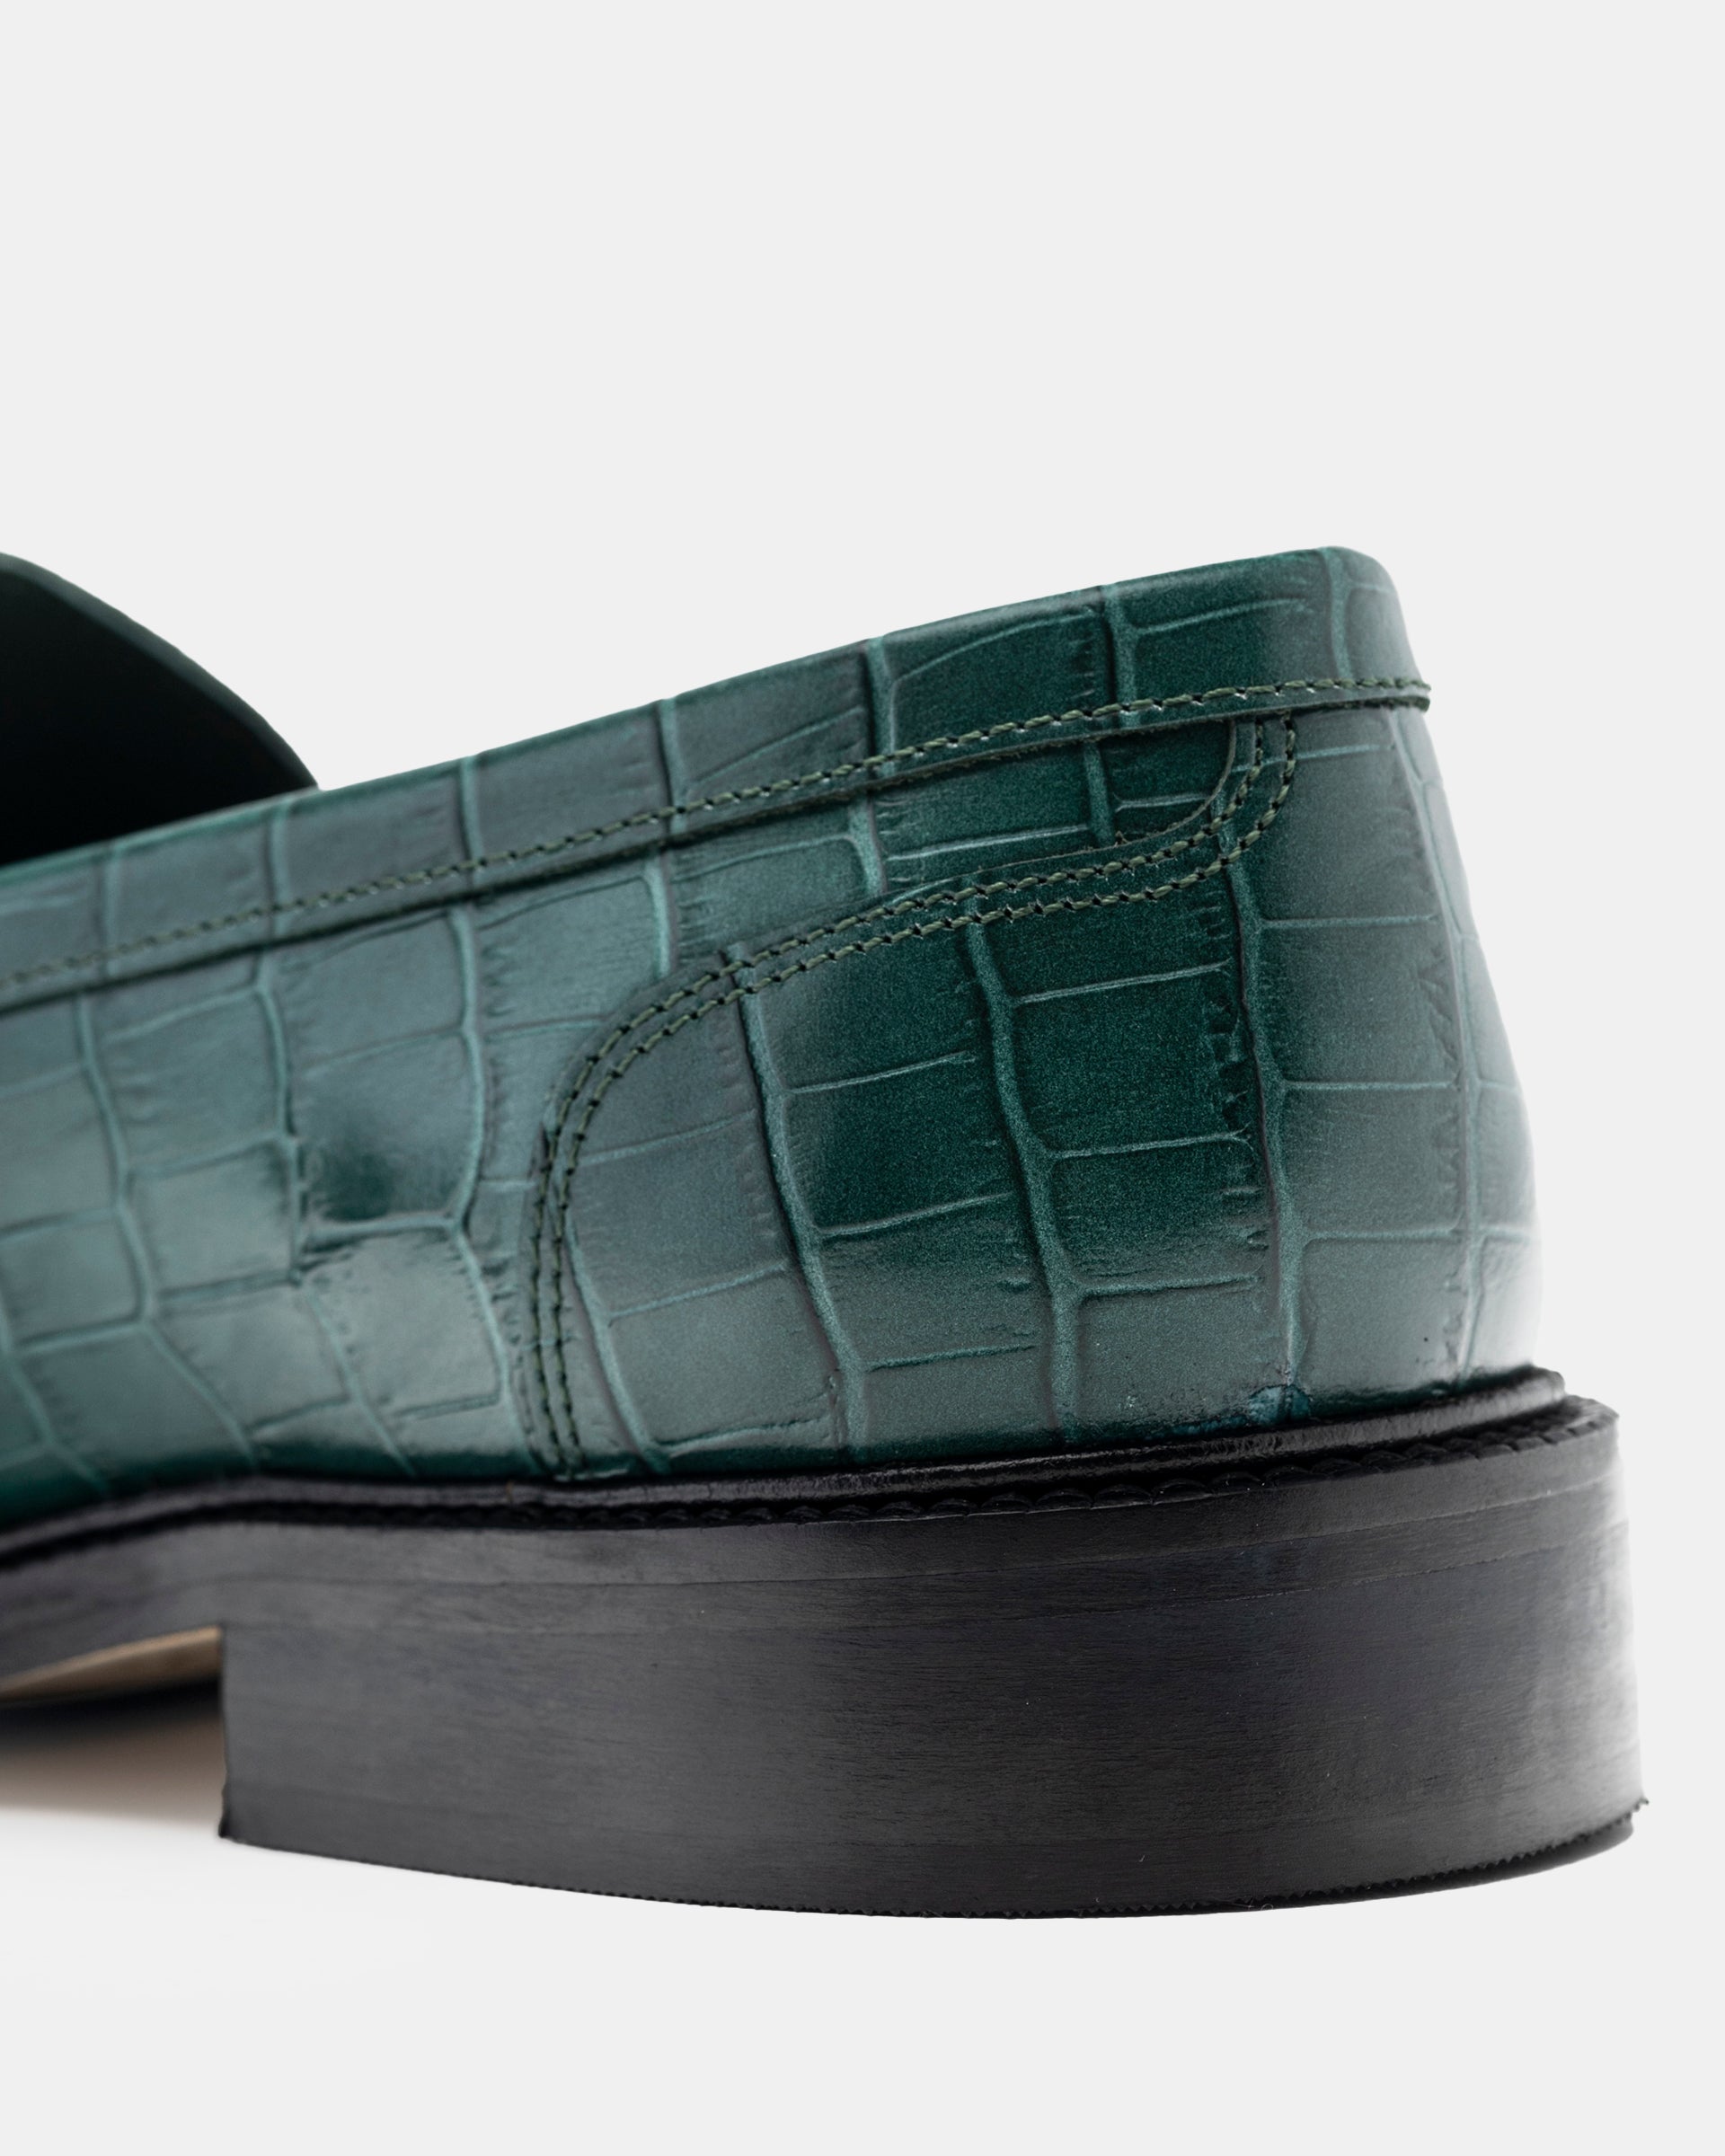 Townee Penny Loafer in Green